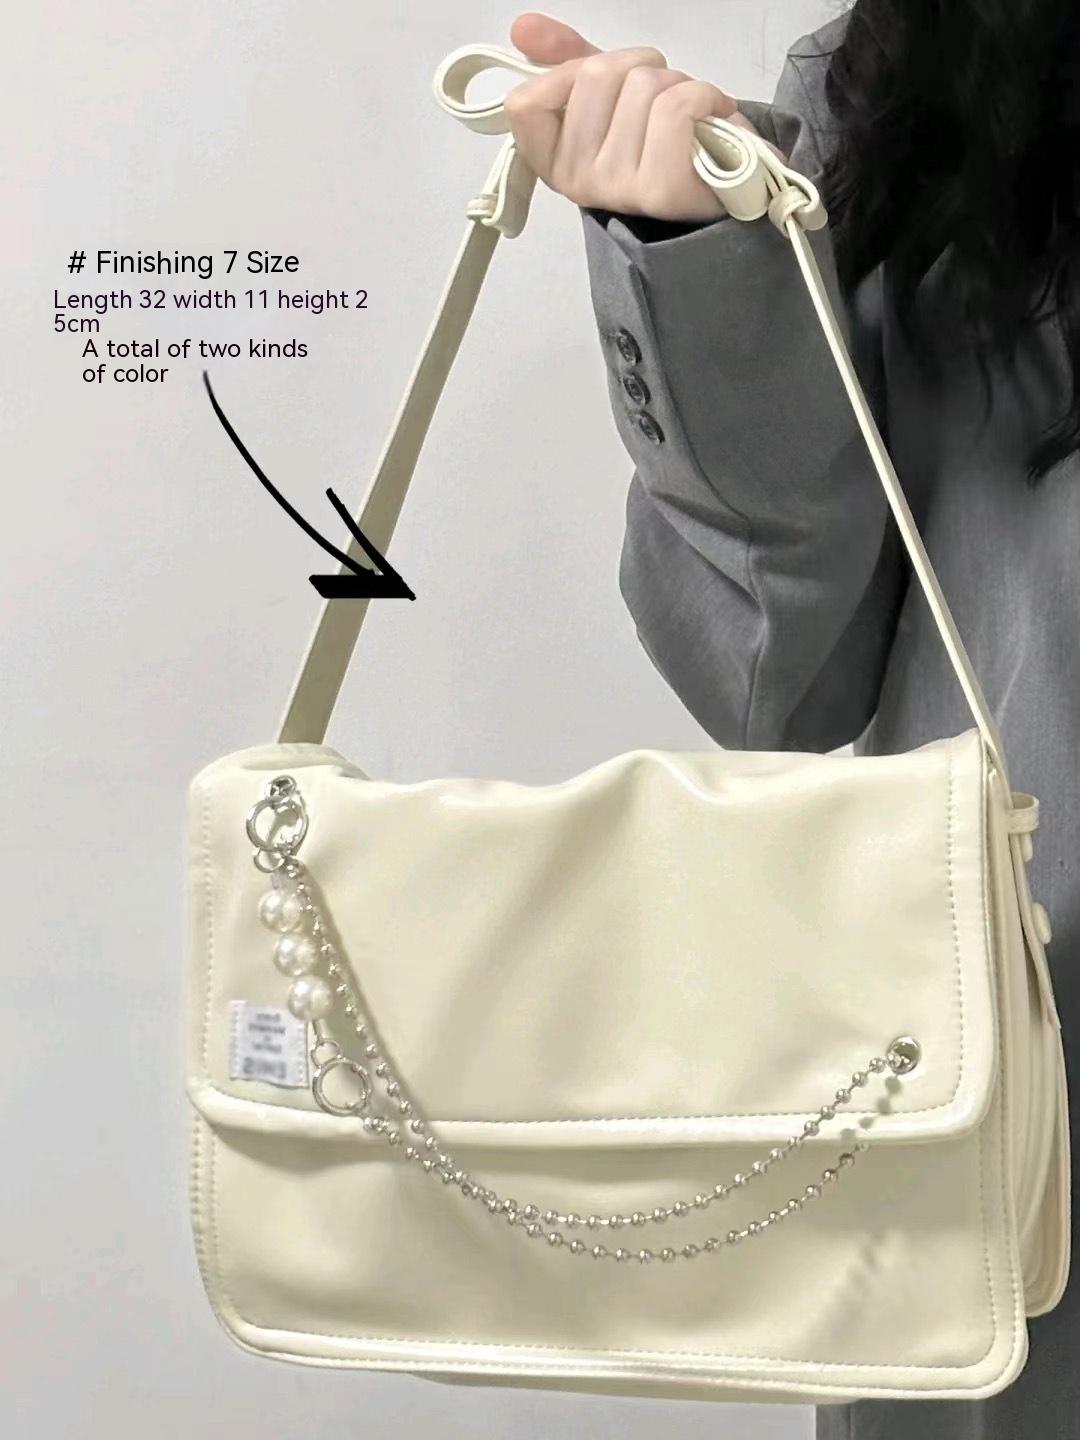 Pearl Chain Commuter's All-matching Shoulder Crossbody Bag